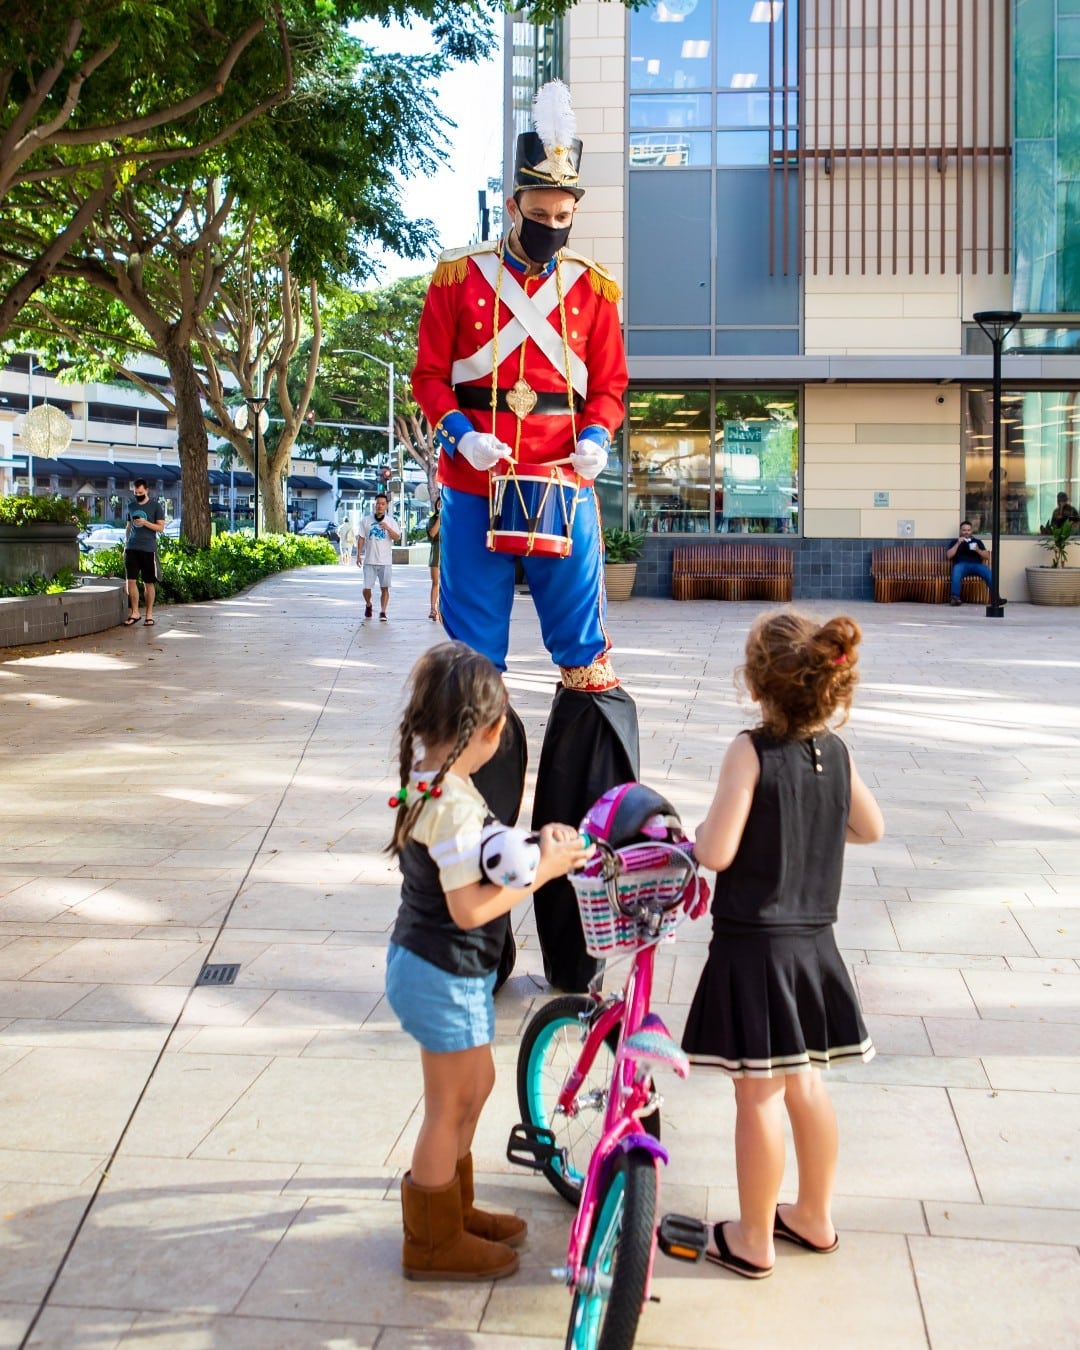 While you’re shopping this weekend, snap a photo with our Drummer Boy Stilt Walkers on Saturday and Sunday from 3pm - 6pm. And join us on December 23 and 24 when our Reindeer and Snowman Stilt Walkers visit Ward Village. See the full schedule of living activations on our Holiday Guide at the link in our bio.